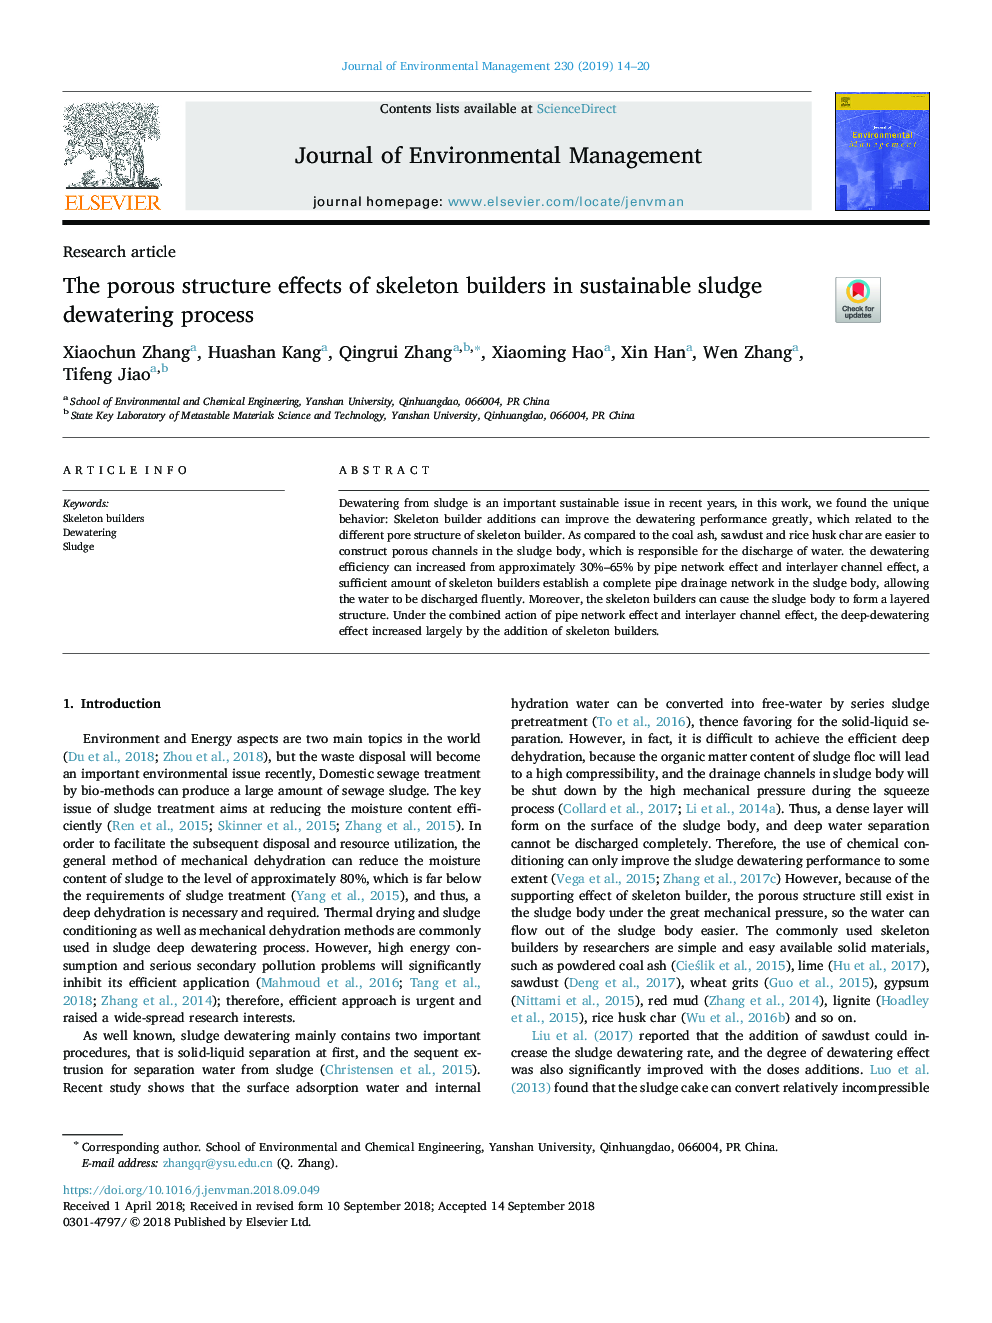 The porous structure effects of skeleton builders in sustainable sludge dewatering process